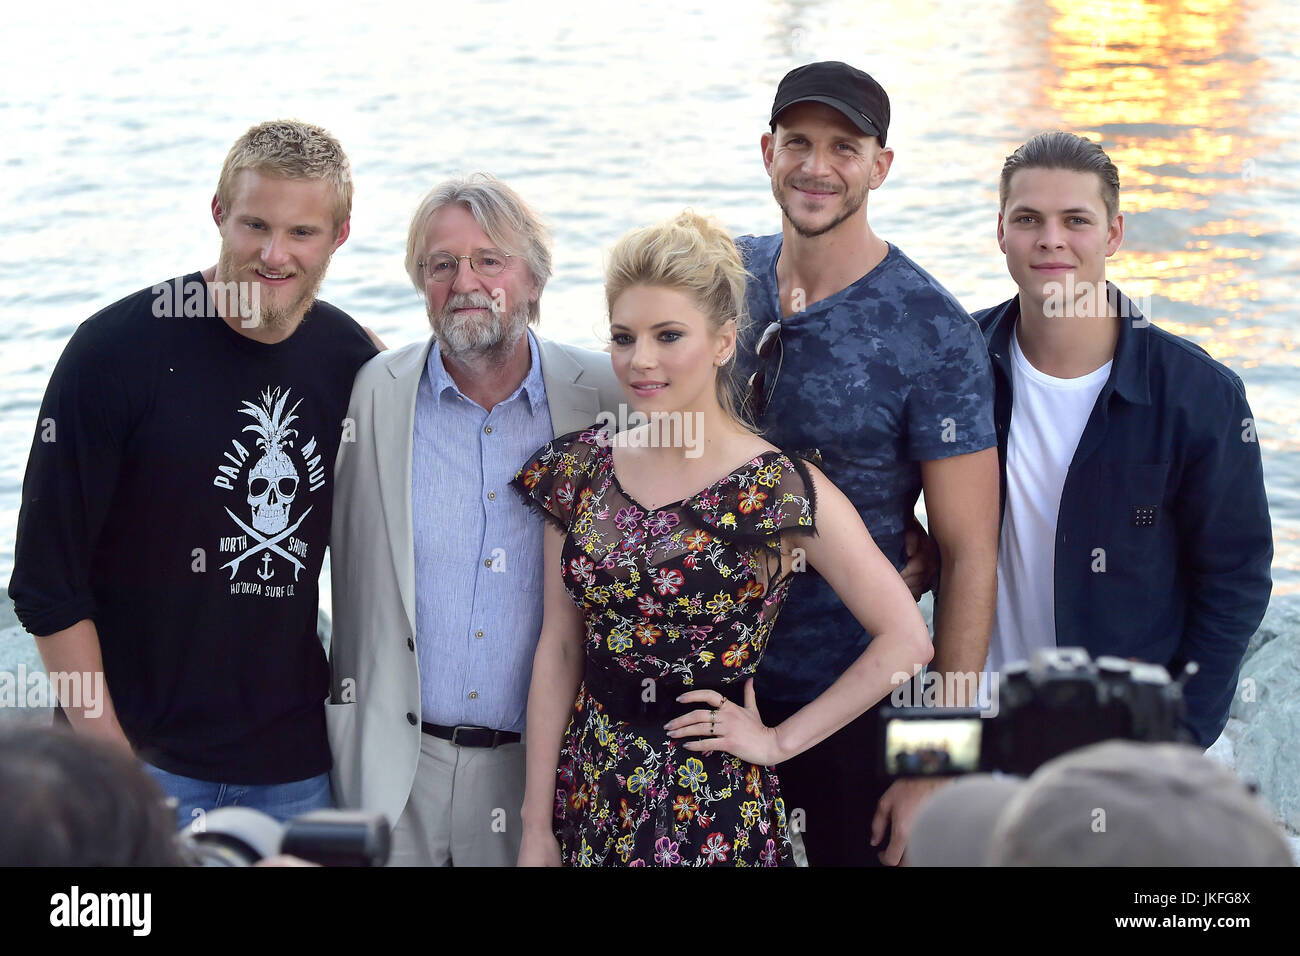 San Diego, California. 21st July, 2017. Alexander Ludwig, Michael Hirst, Katheryn Winnick, Gustaf Skarsgard and Alex Hogh Andersen of HISTORY'S 'Vikings' attend the Viking Funeral Ceremony at San Diego Comic Con 2017 on July 21, 2017 in San Diego, California. | usage worldwide Credit: dpa/Alamy Live News Stock Photo